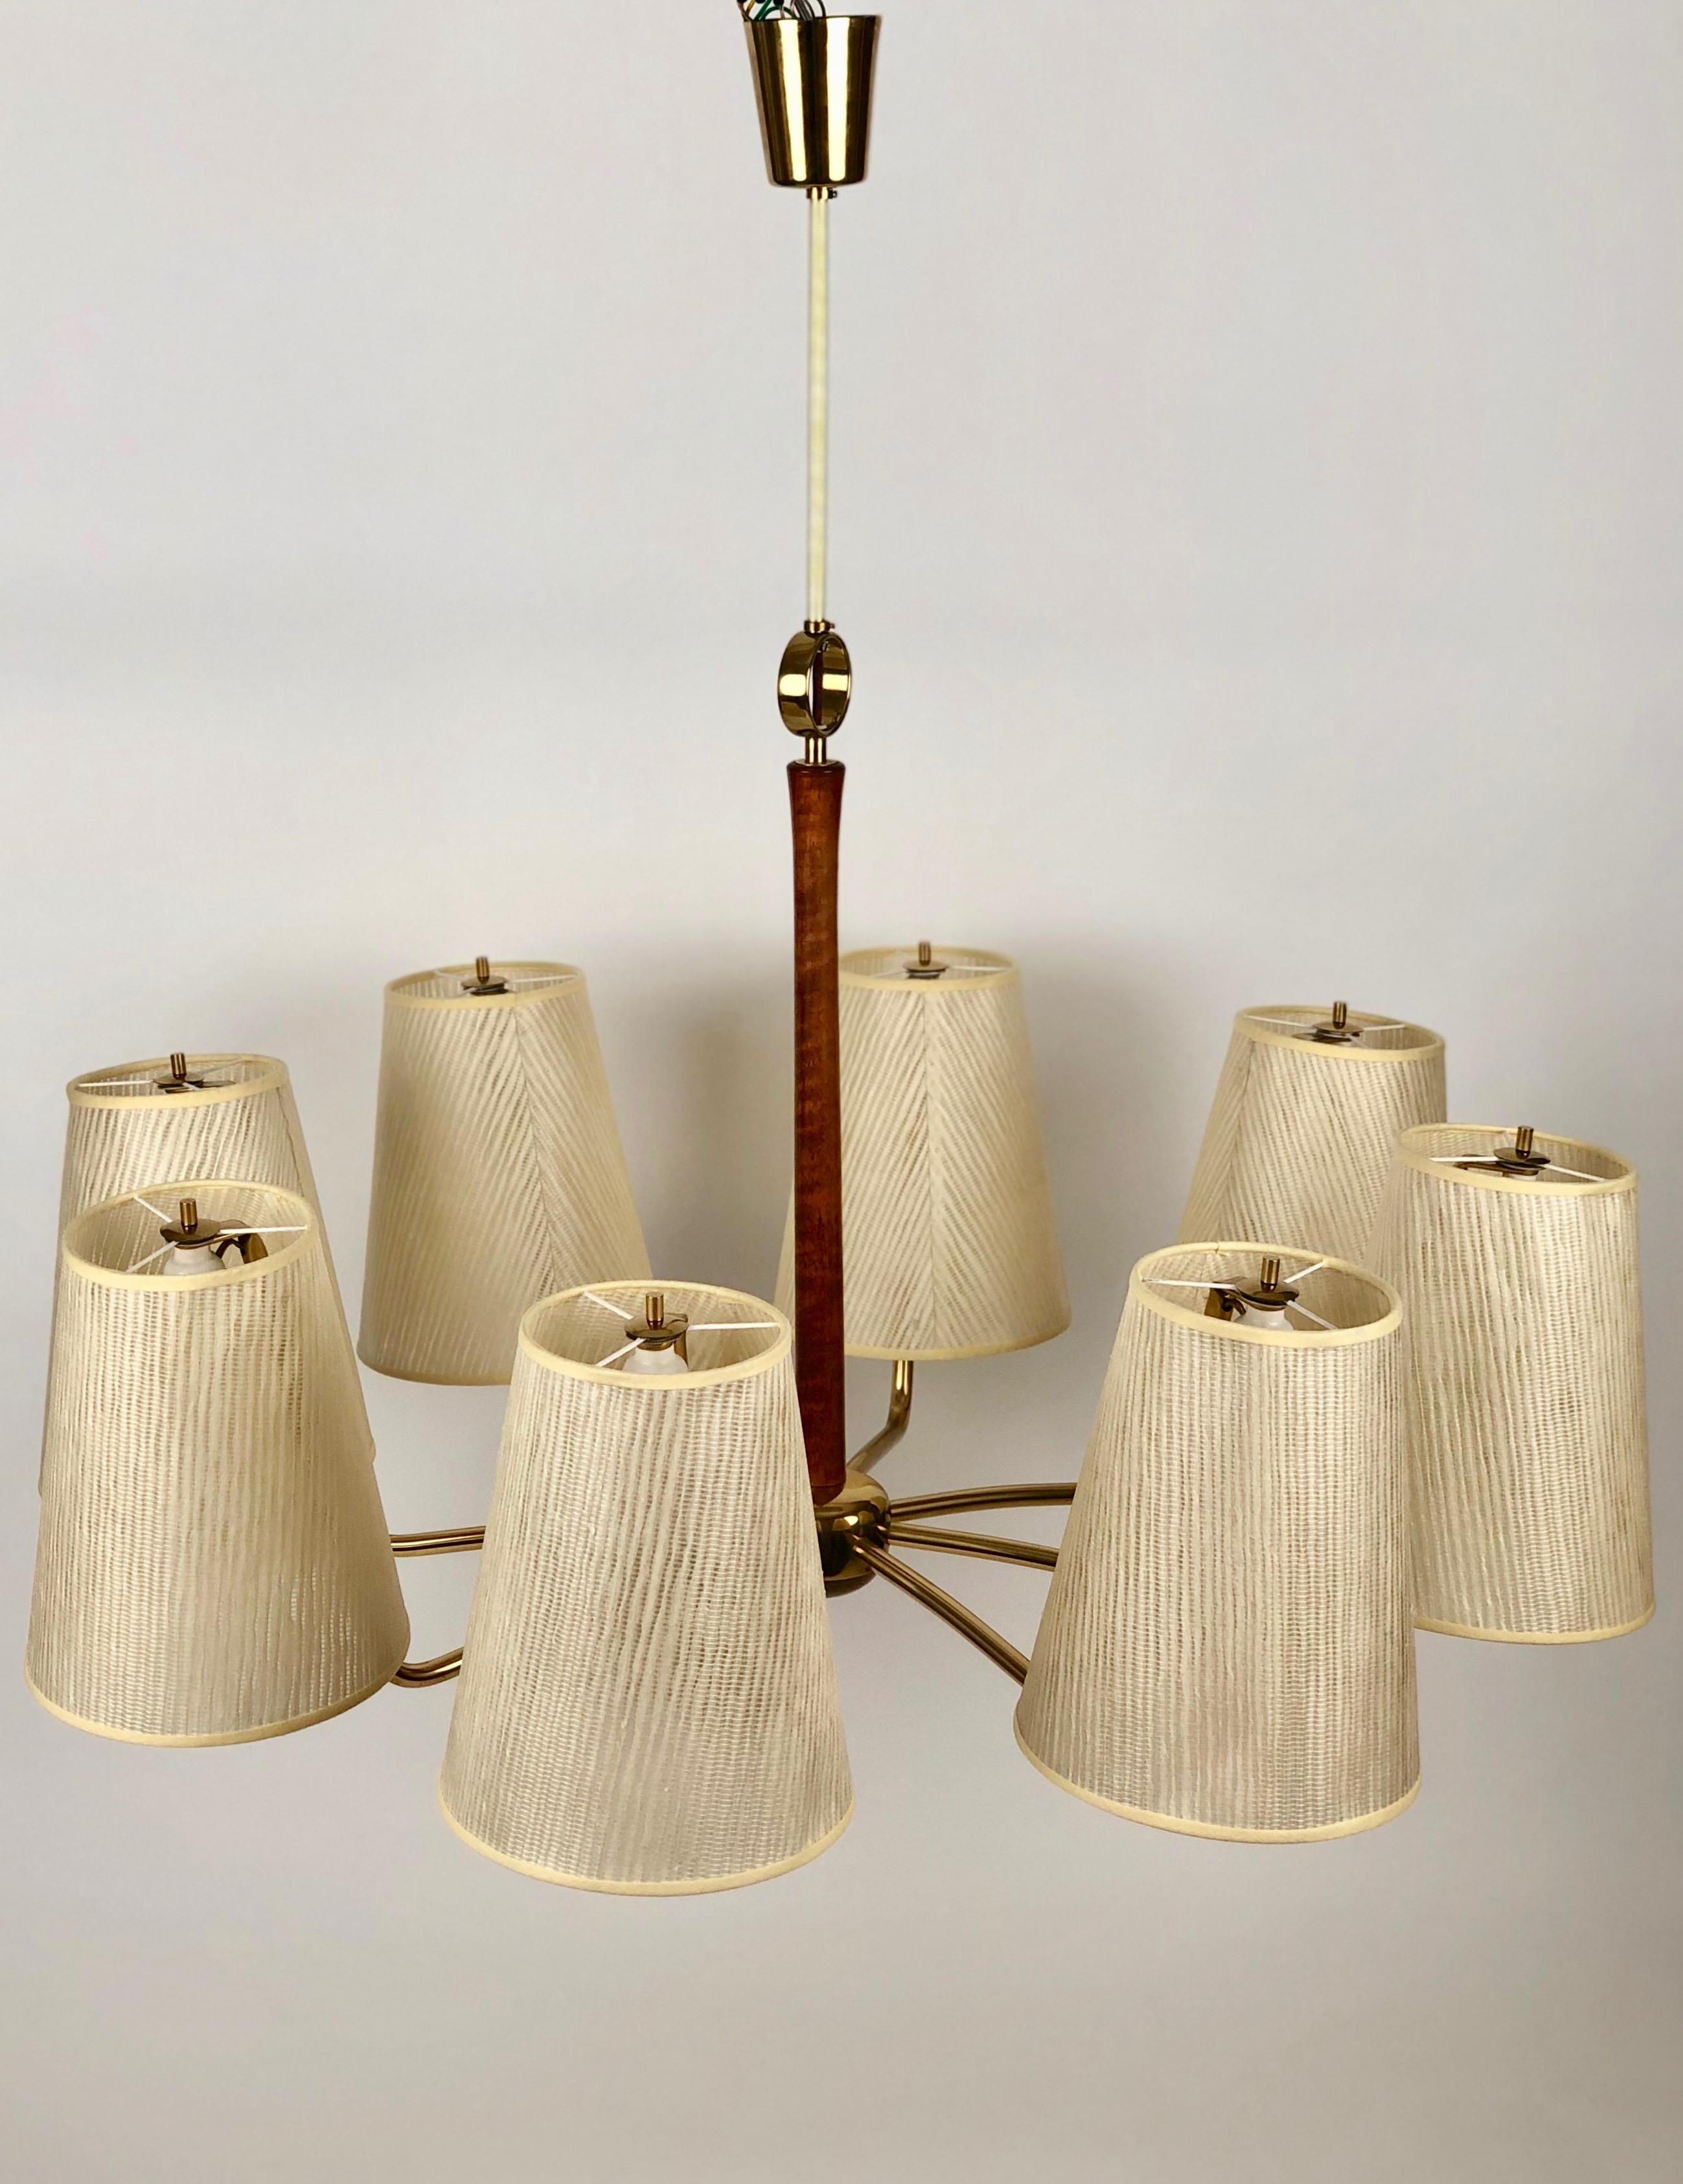 A beautiful pendant lamp from Josef Frank. This 7 arm lamp in brass with walnut accents
is simply a Wow! The subtile accents in wood and brass make this piece very sublime 
in its design. The shades are composed of synthetic fibres and resin and